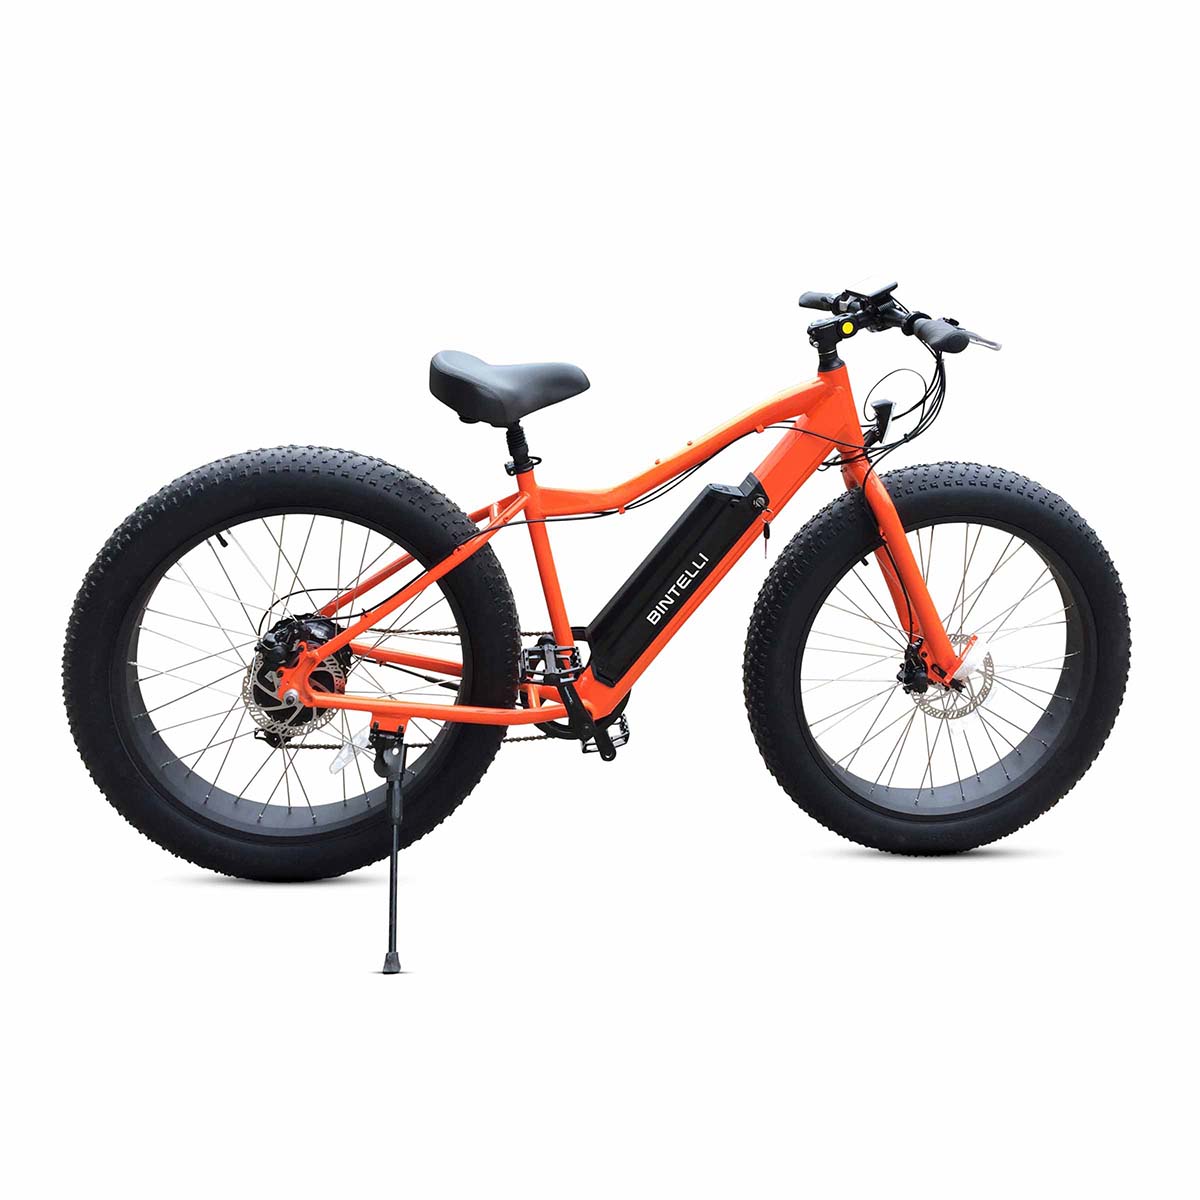 Bintelli M1 Electric Bicycle in Color Orange With Fat Tire